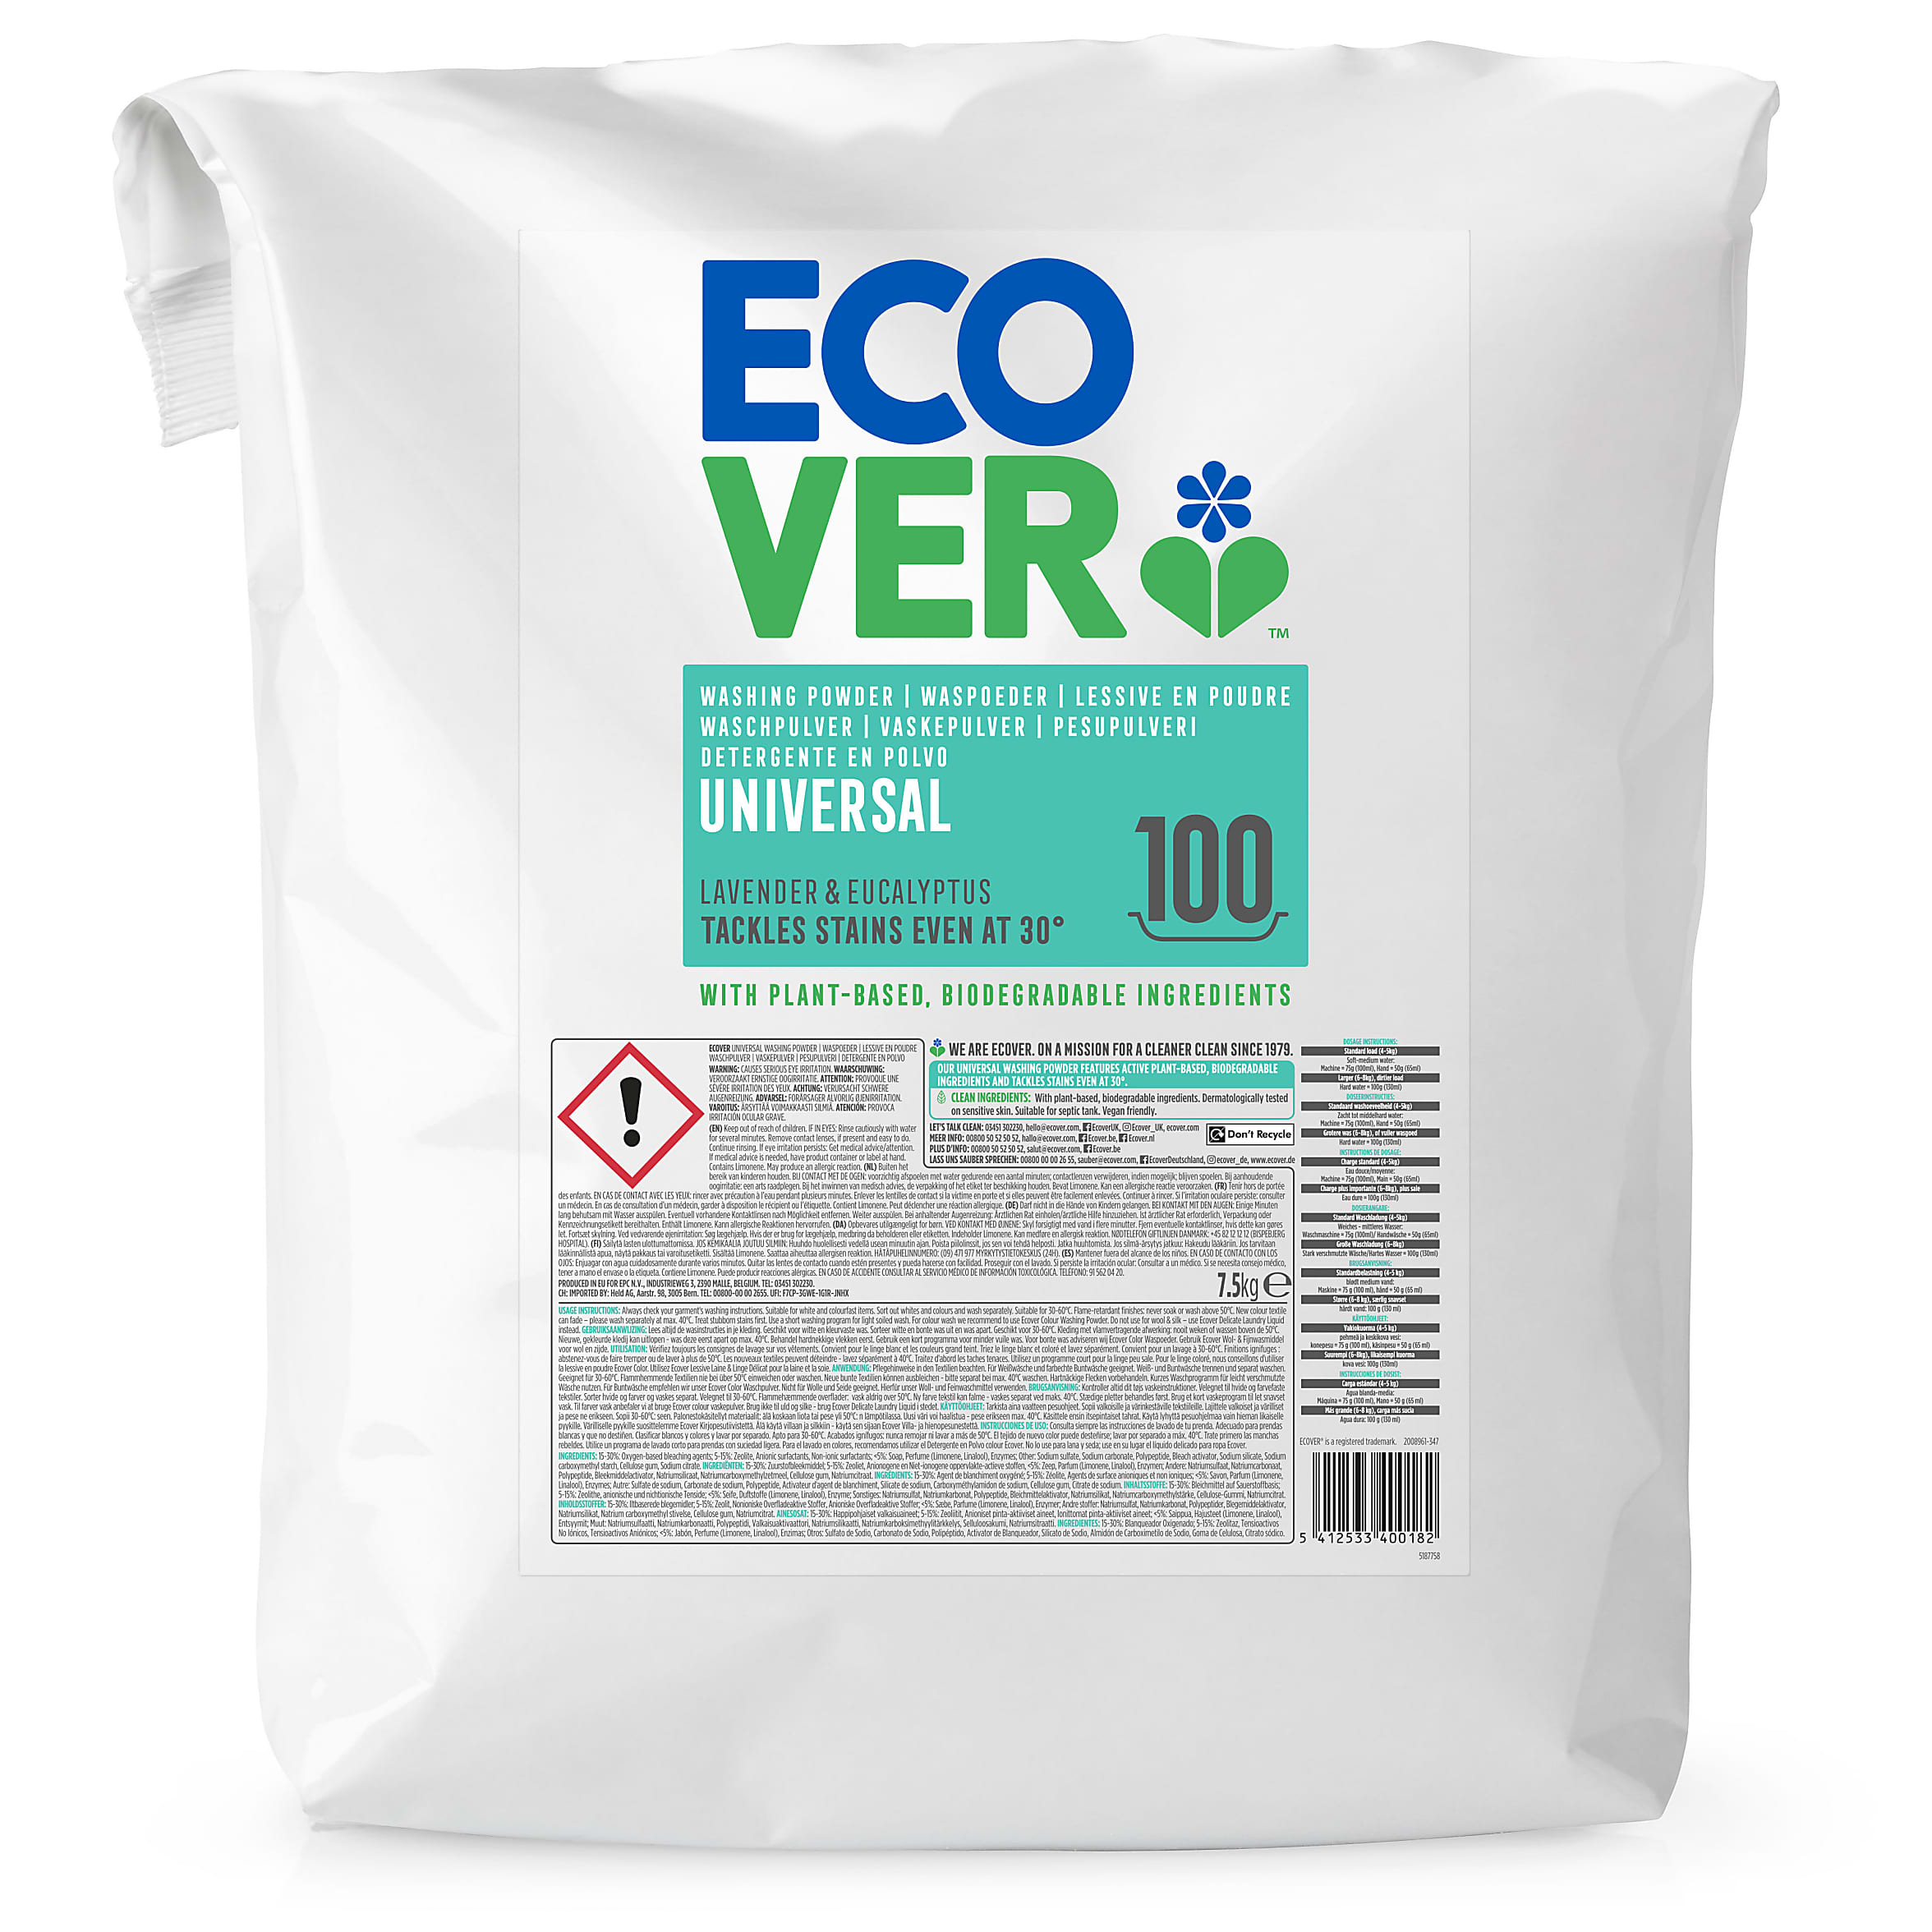   Ecover Universal, 7,5  (100 )